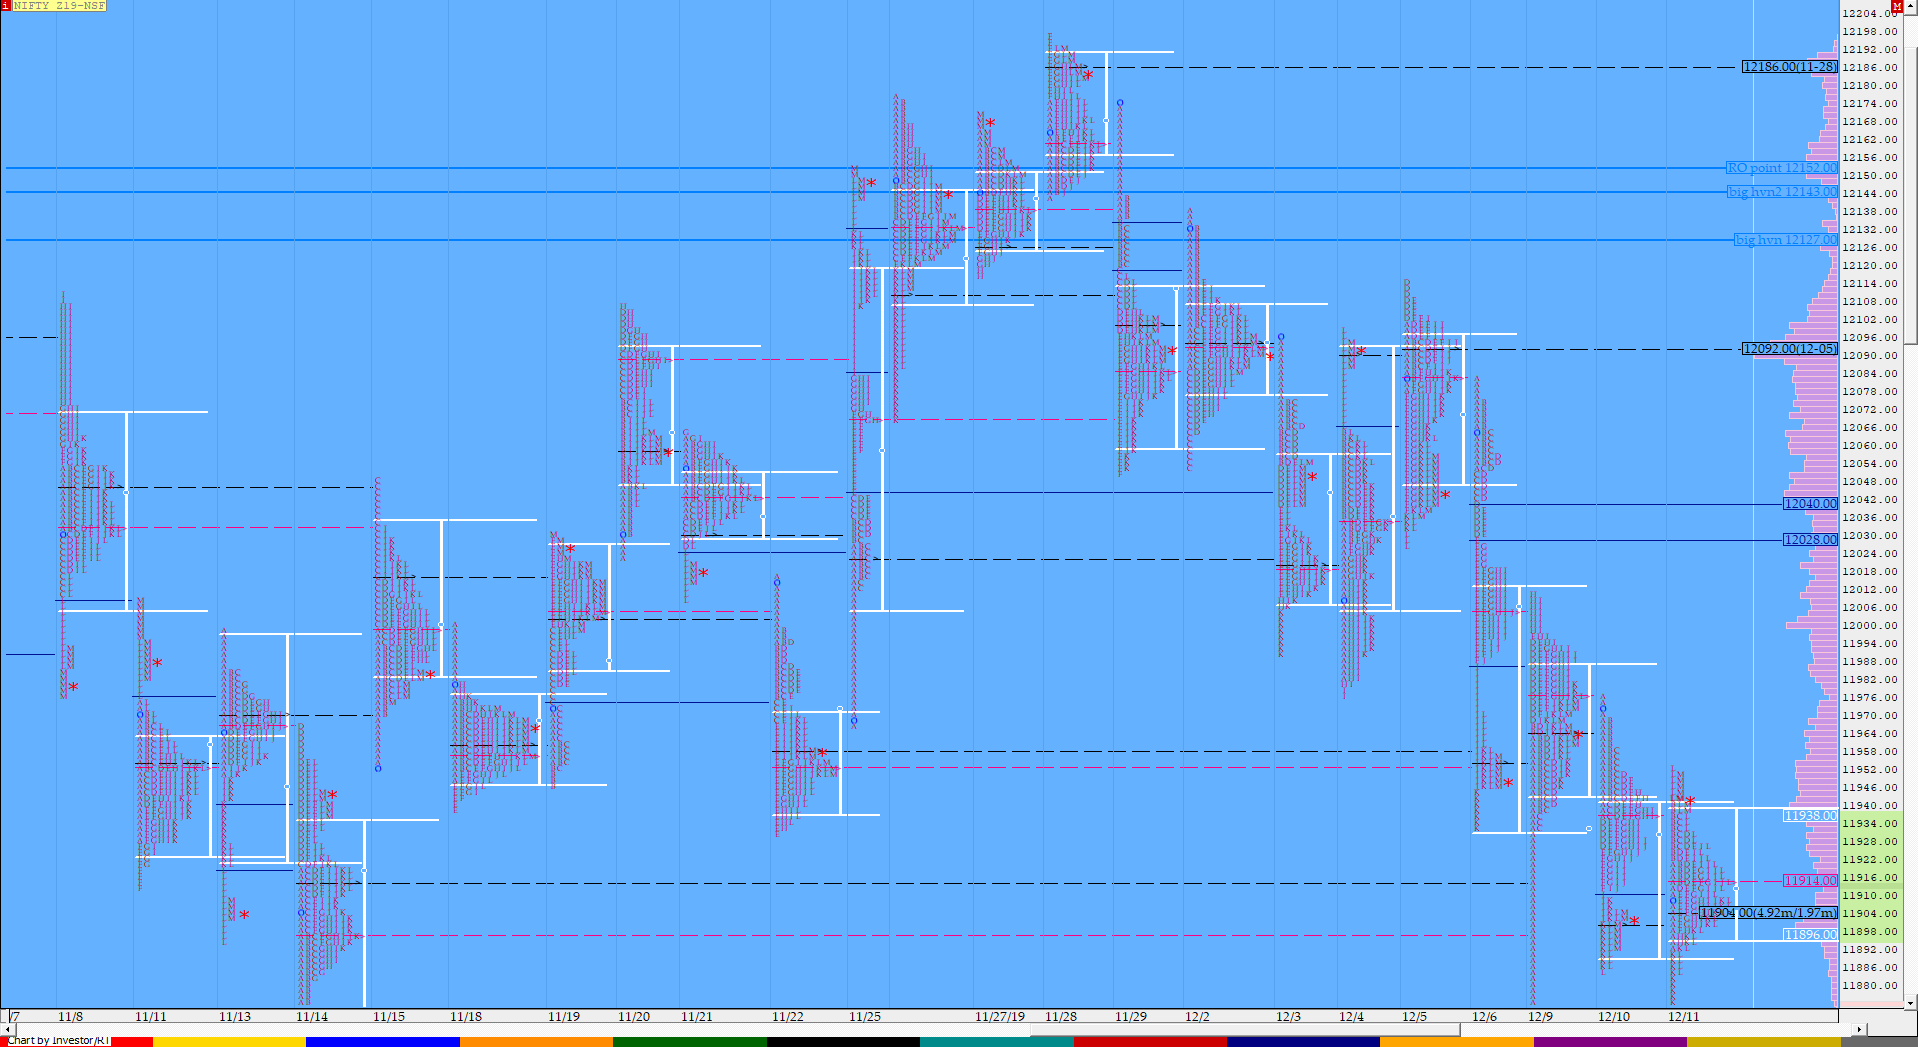 Nf Compo1 8 Market Profile Analysis Dated 11Th December Banknifty Futures, Charts, Day Trading, Intraday Trading, Intraday Trading Strategies, Market Profile, Market Profile Trading Strategies, Nifty Futures, Order Flow Analysis, Support And Resistance, Technical Analysis, Trading Strategies, Volume Profile Trading